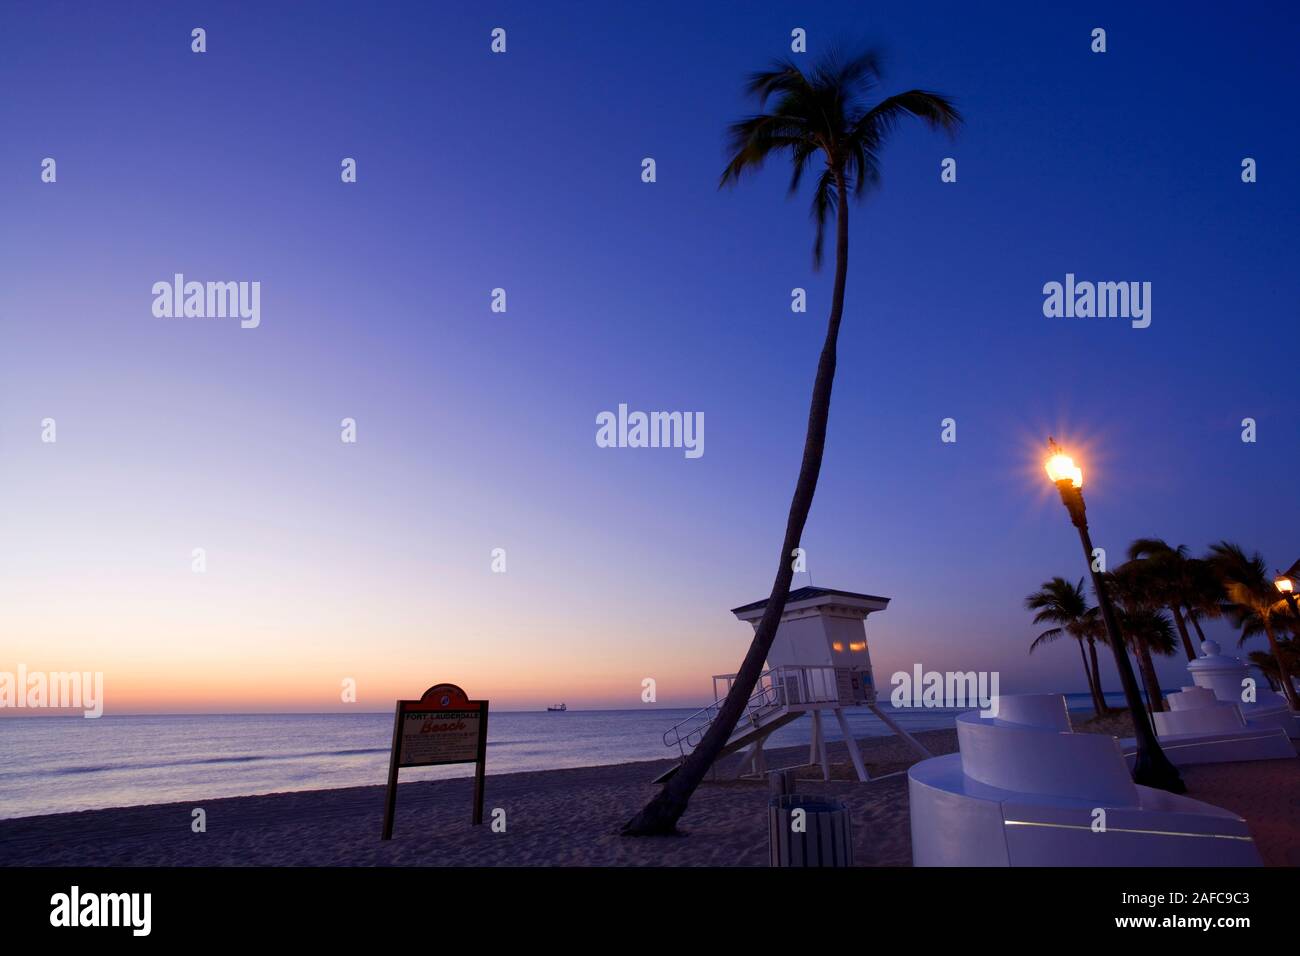 Sunrise at Fort Lauderdale Beach in Florida, USA Stock Photo